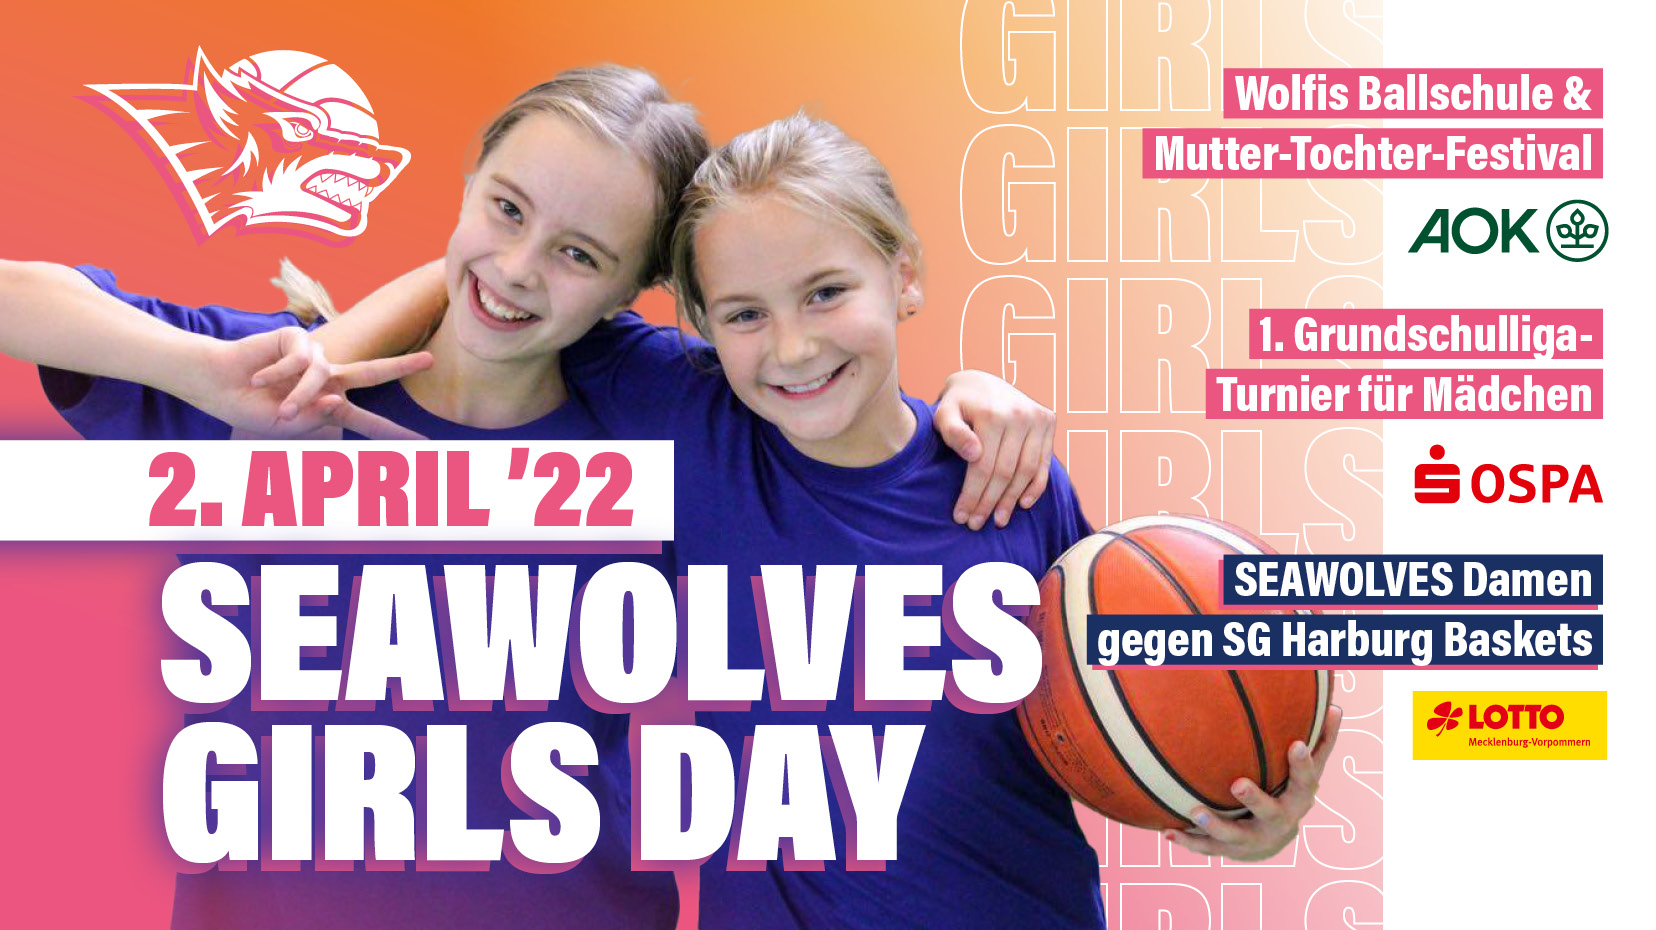 Save the Date: SEAWOLVES GIRLS DAY am 2. April 2022